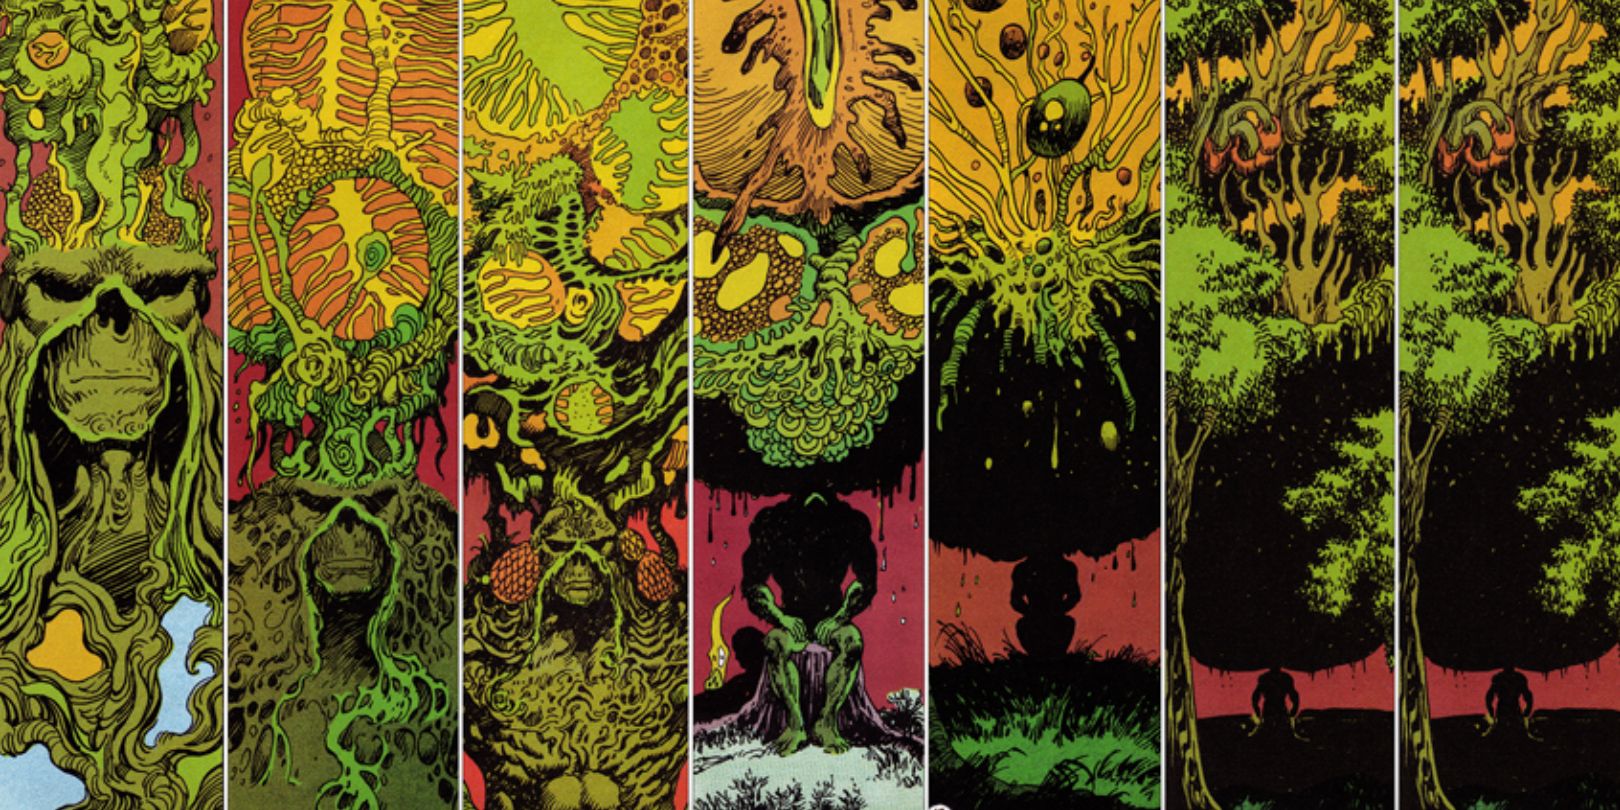 Swamp Thing creates plant life from just his thoughts in DC Comics